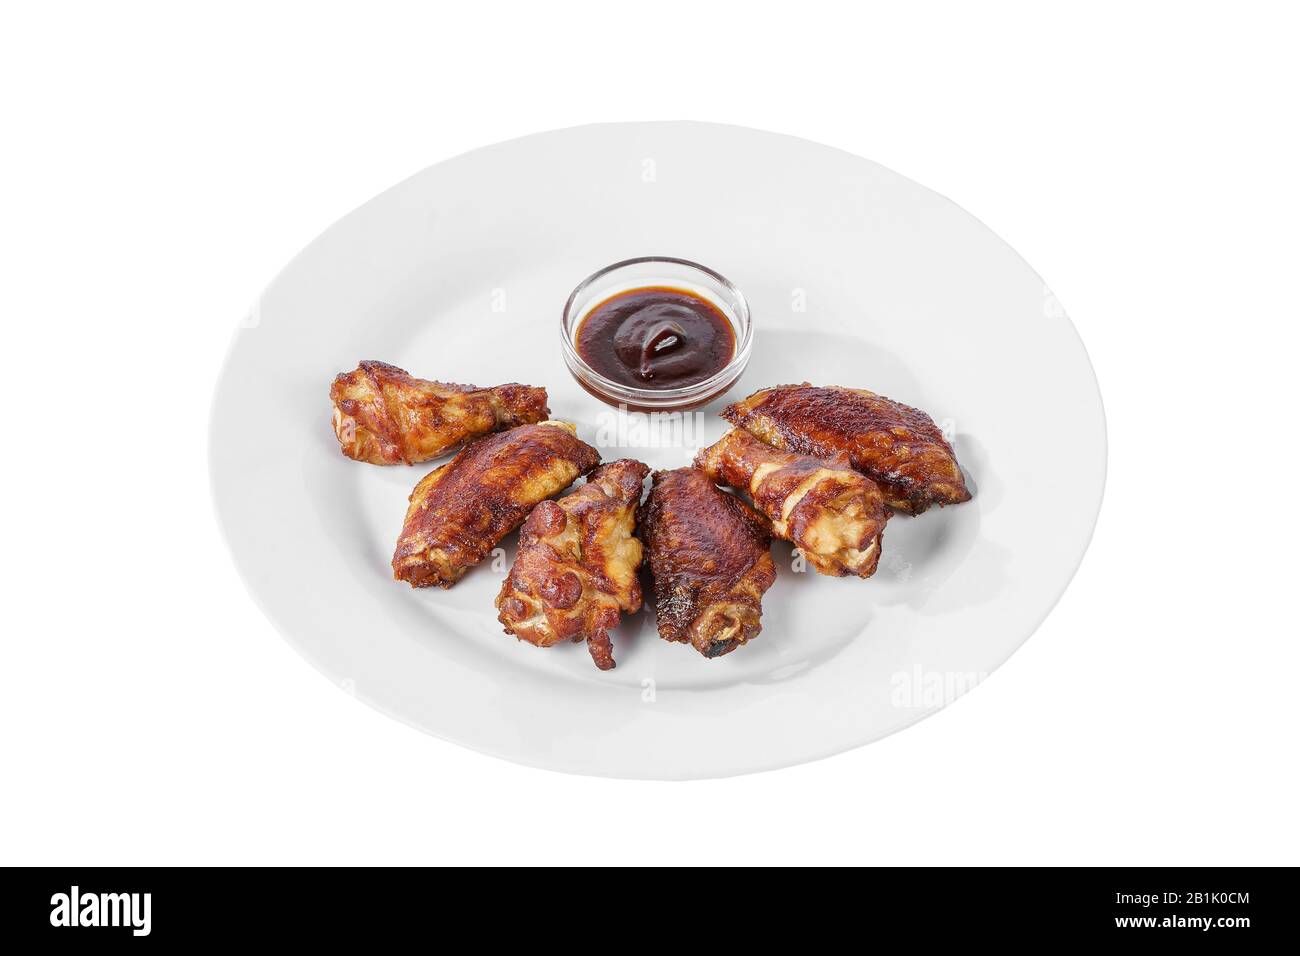 Hot appetizer chicken pieces, legs, wings, fried in oil, tomato sauce, ketchup, B-B-Q, before alcohol, on plate, white isolated background, Side view. Stock Photo